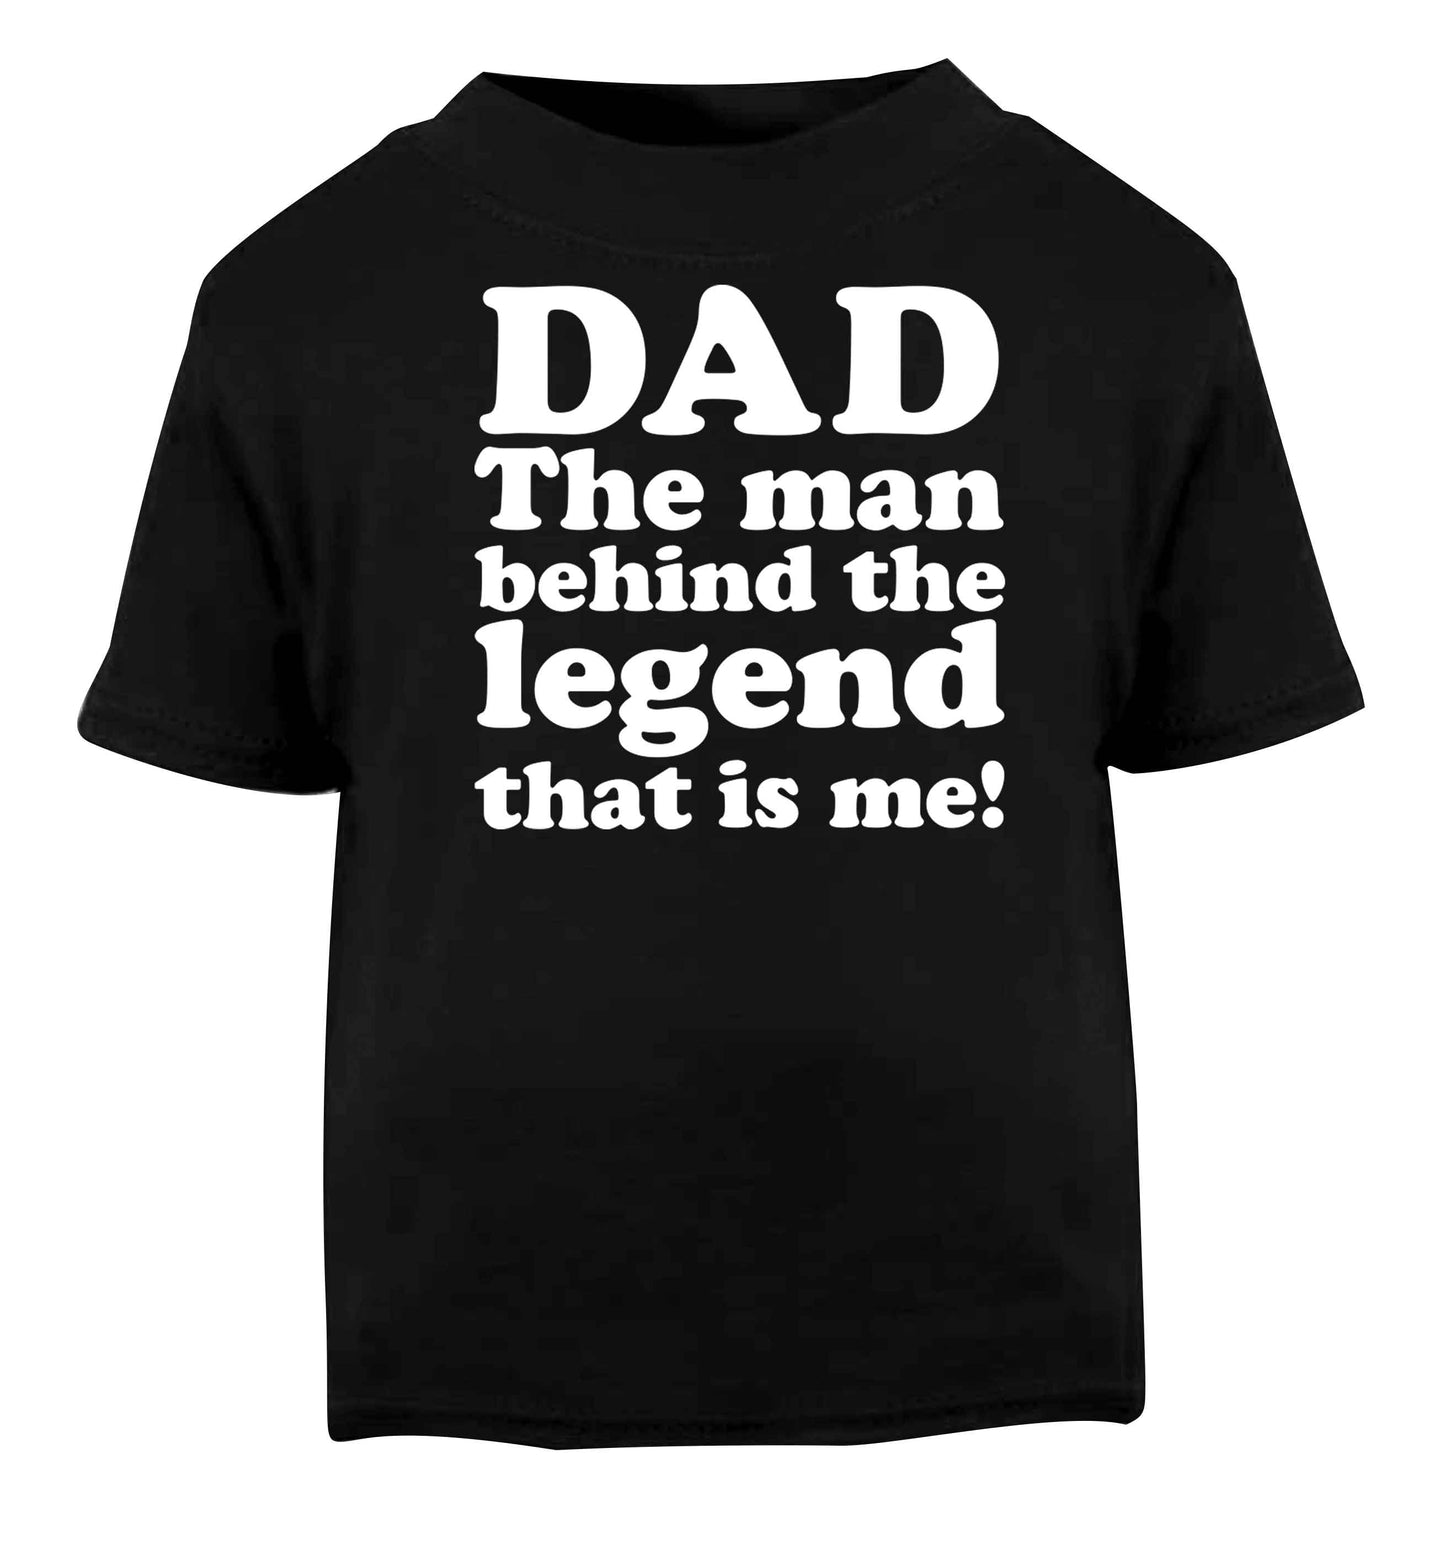 Dad the man behind the legend that is me Black baby toddler Tshirt 2 years